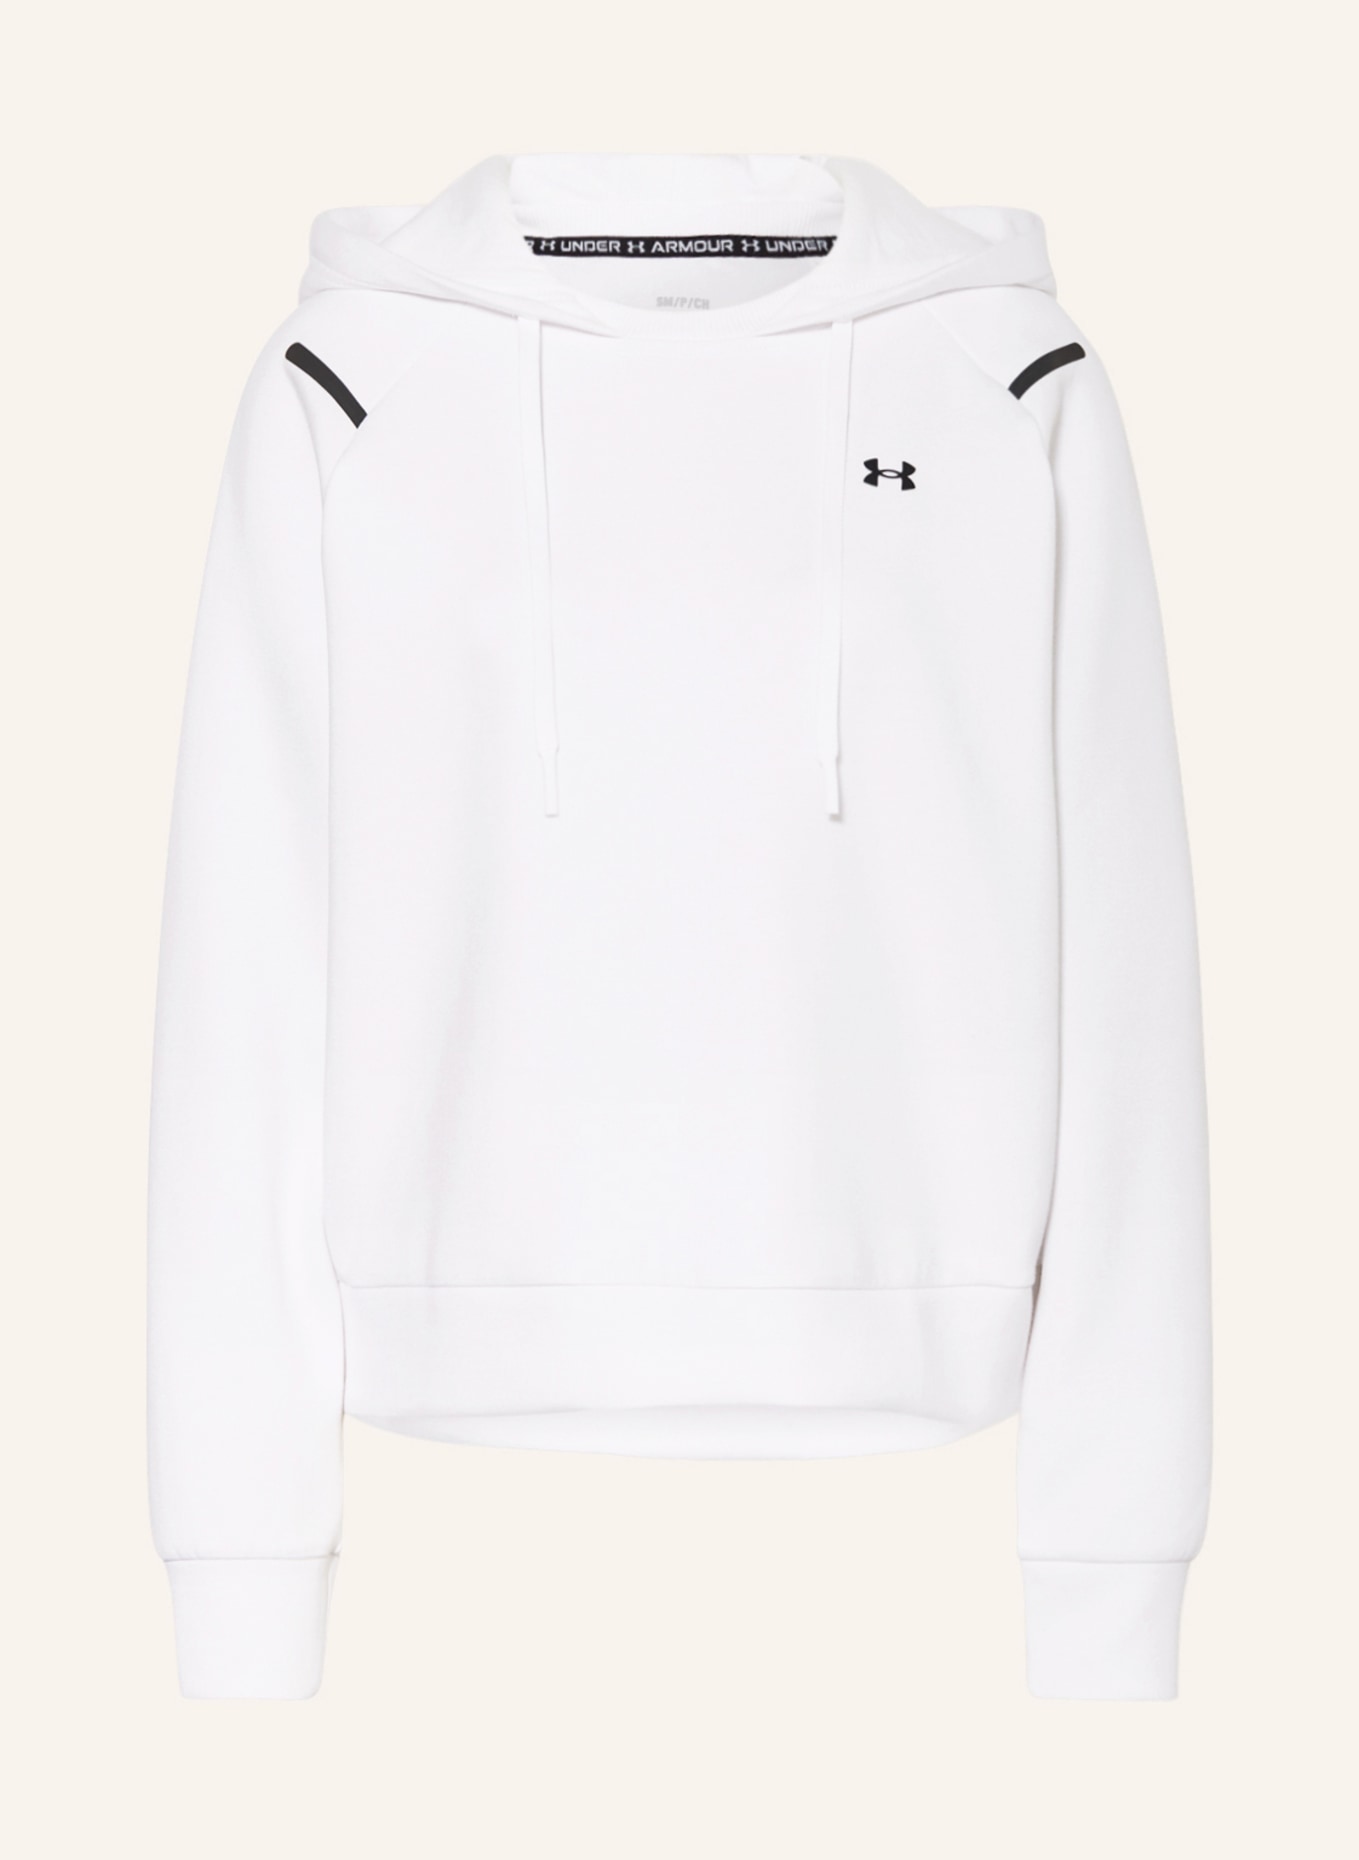 UNDER ARMOUR Hoodie UNSTOPPABLE, Farbe: WEISS (Bild 1)